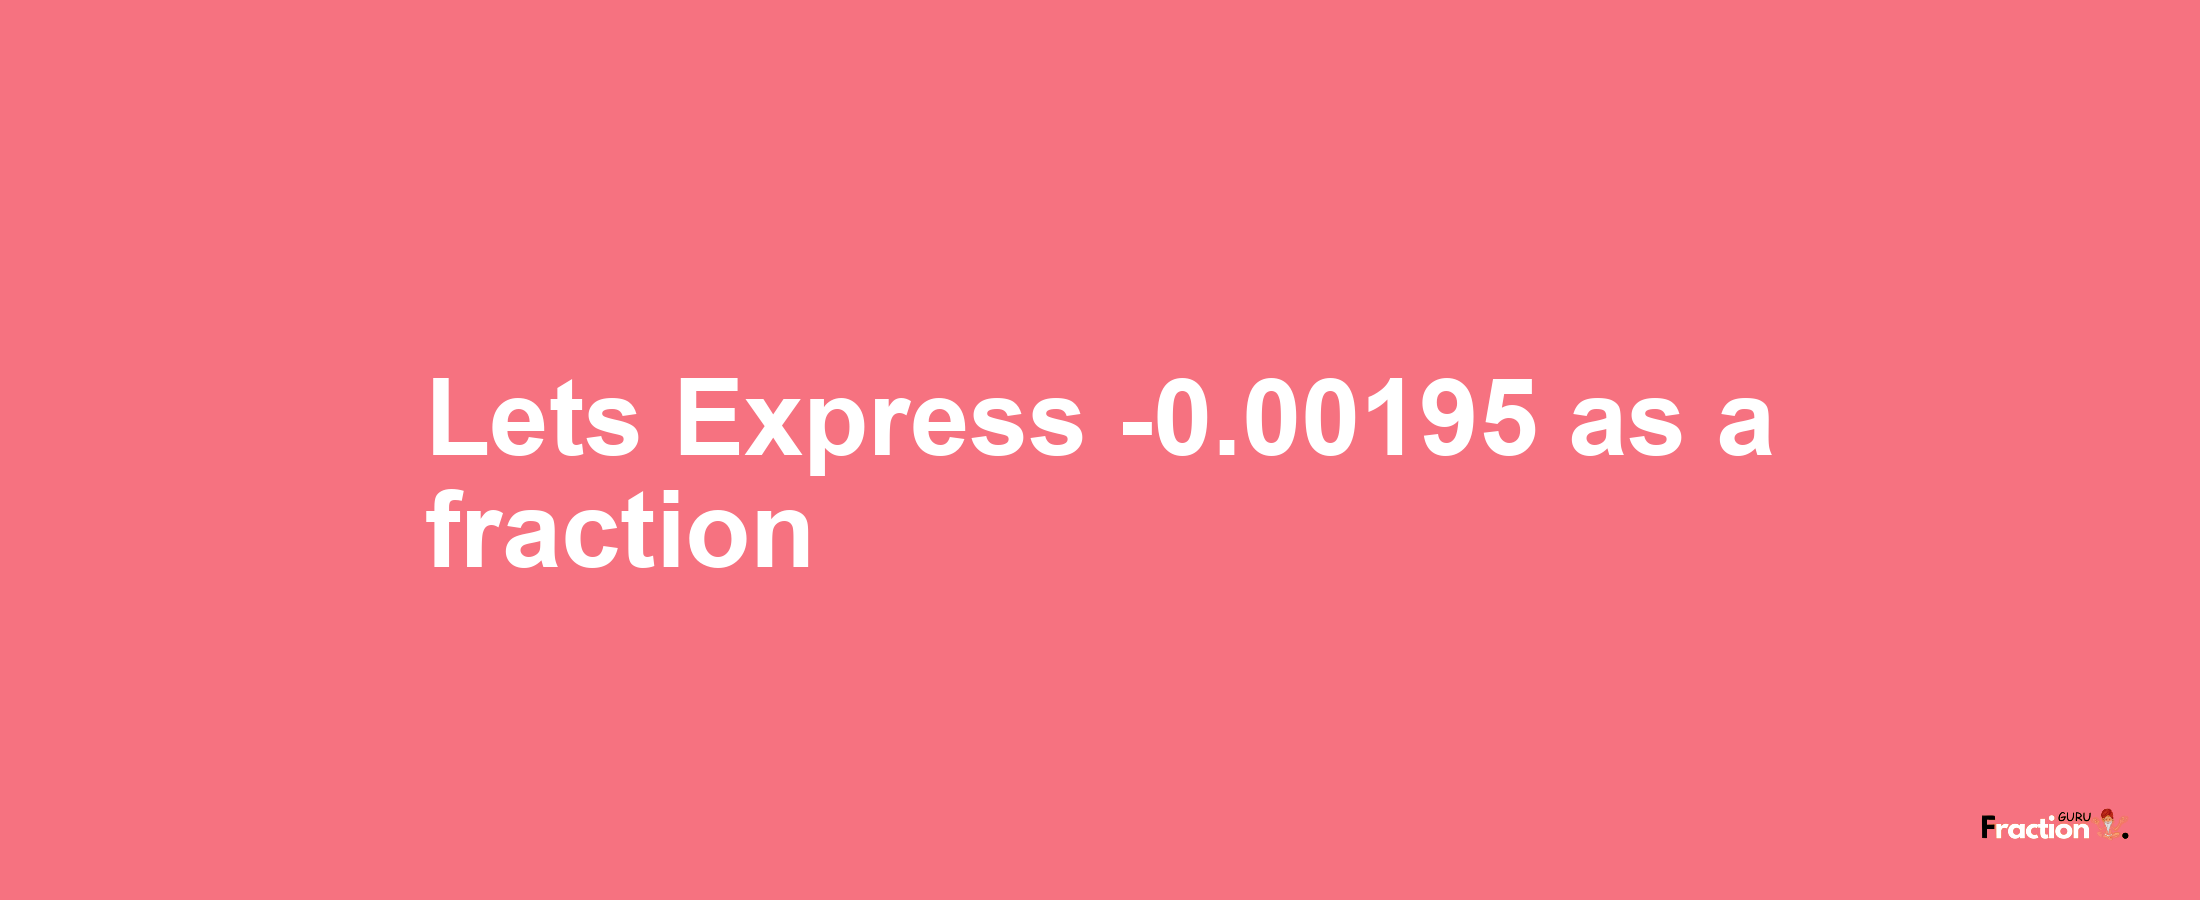 Lets Express -0.00195 as afraction